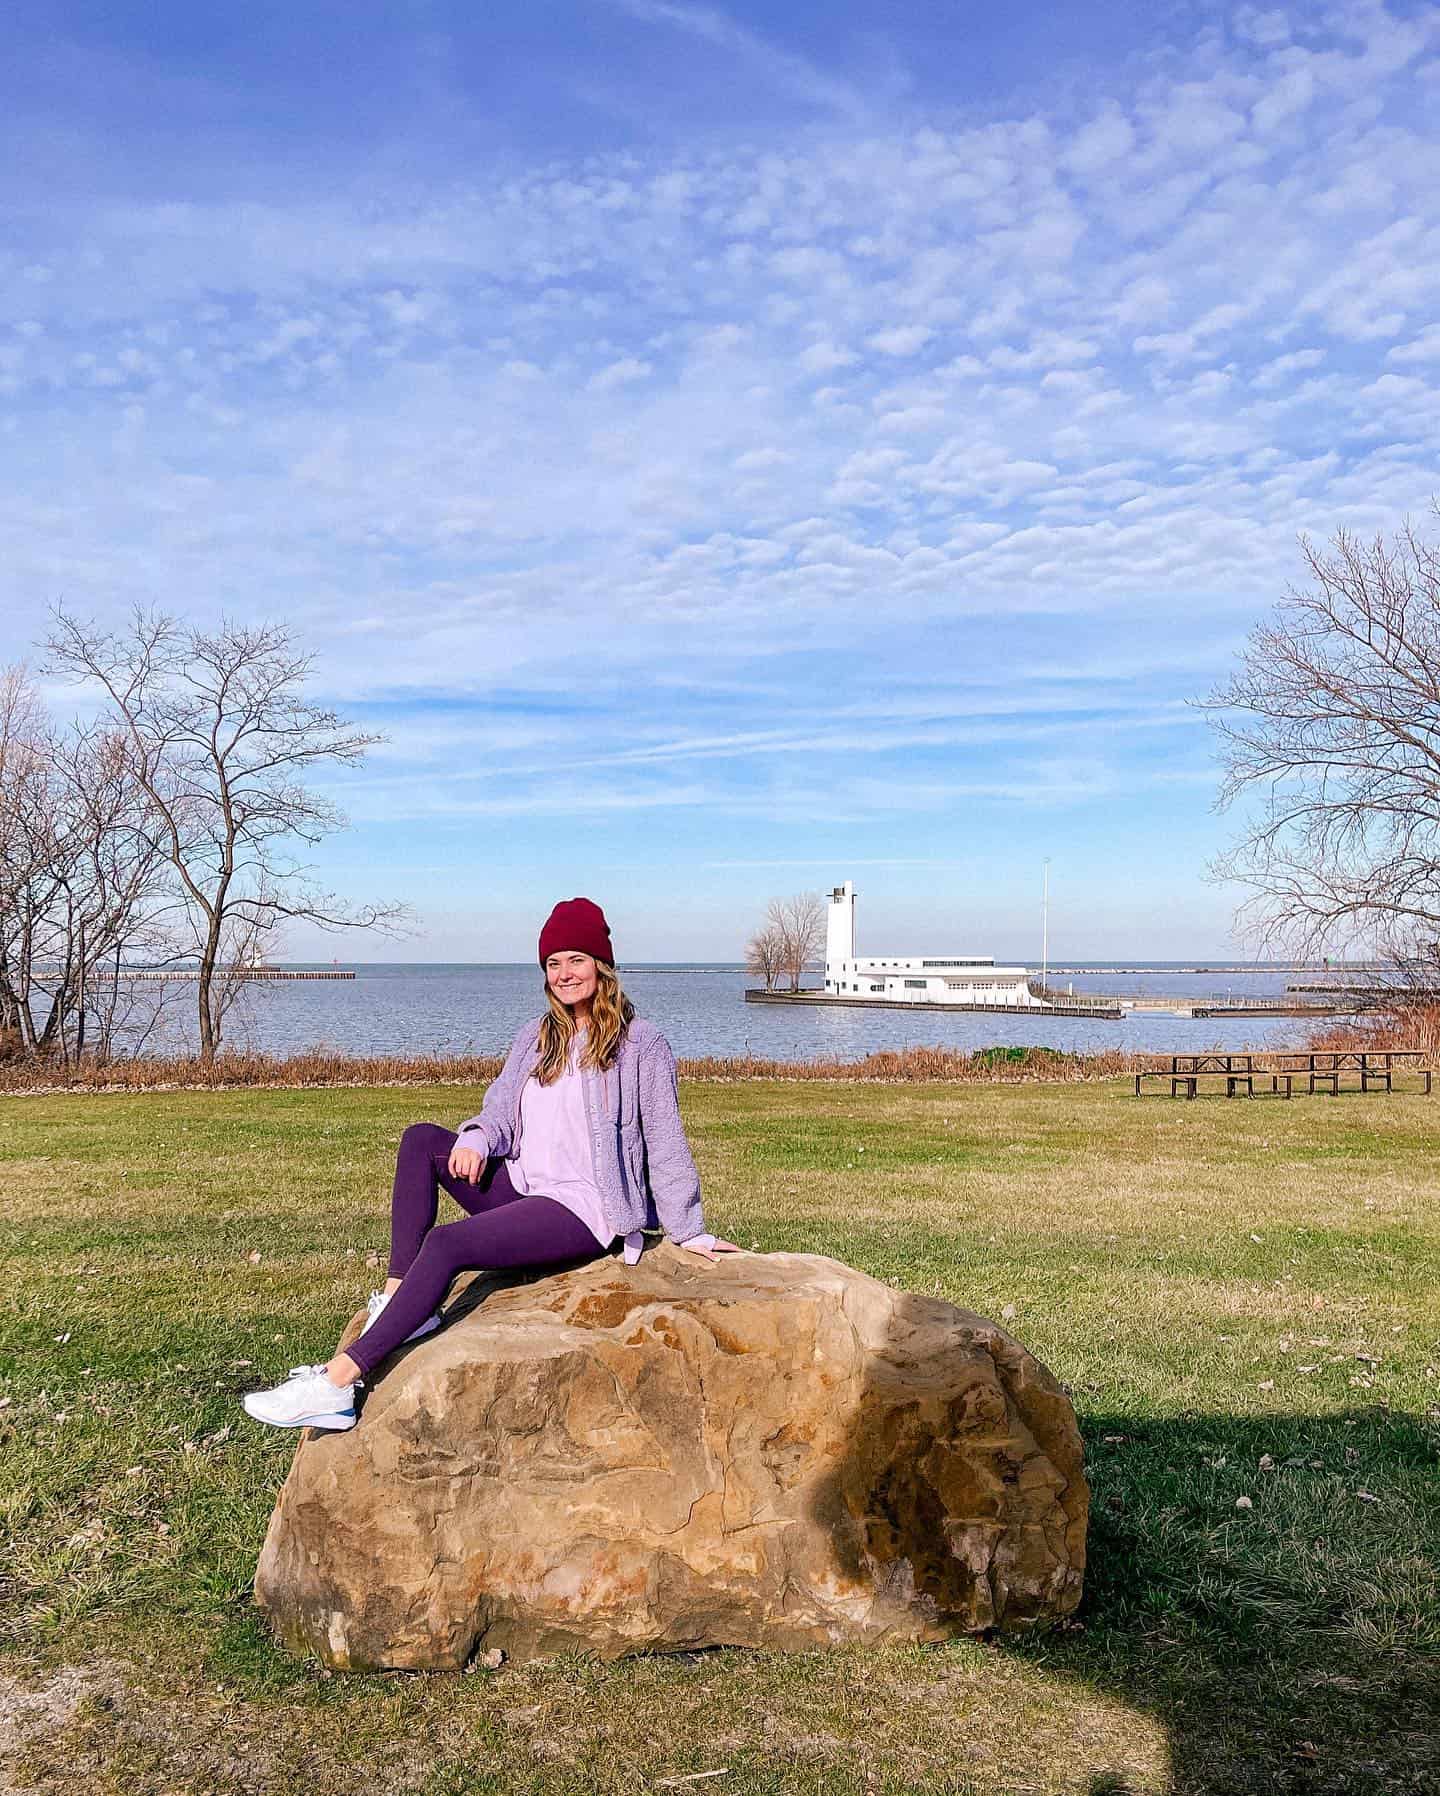 💜 Afternoon walks to Lake Erie 💜  Today we took a walk from our place in Ohio City down to Wendy Park and it was so nice to enjoy the sunshine and get out of the house. I’m wearing my new @athleta outfit I picked up from @crockerpark the other day and it is seriously the most comfy outfit I’ve worn in a long time! #AthletaCP  I’m wearing the Ultra High Rise Elation Tight and Coaster Luxe Sweatshirt here and I’m obviously obsessed with the purple colors!  Stop in to @athleta in @crockerpark if you need any last minute gifts - they have an amazing list of their Top 10 Gifts to give this year and the workers are all so kind and lovely every time I visit. They’ll help you pick out the perfect gift (or help you shop for yourself 😜). Check out my stories for more Athleta gift ideas and some links. 🥰  #complimentary #powerofshe #athleta #clevelandbloggers #clevelandmetroparks #thisiscle